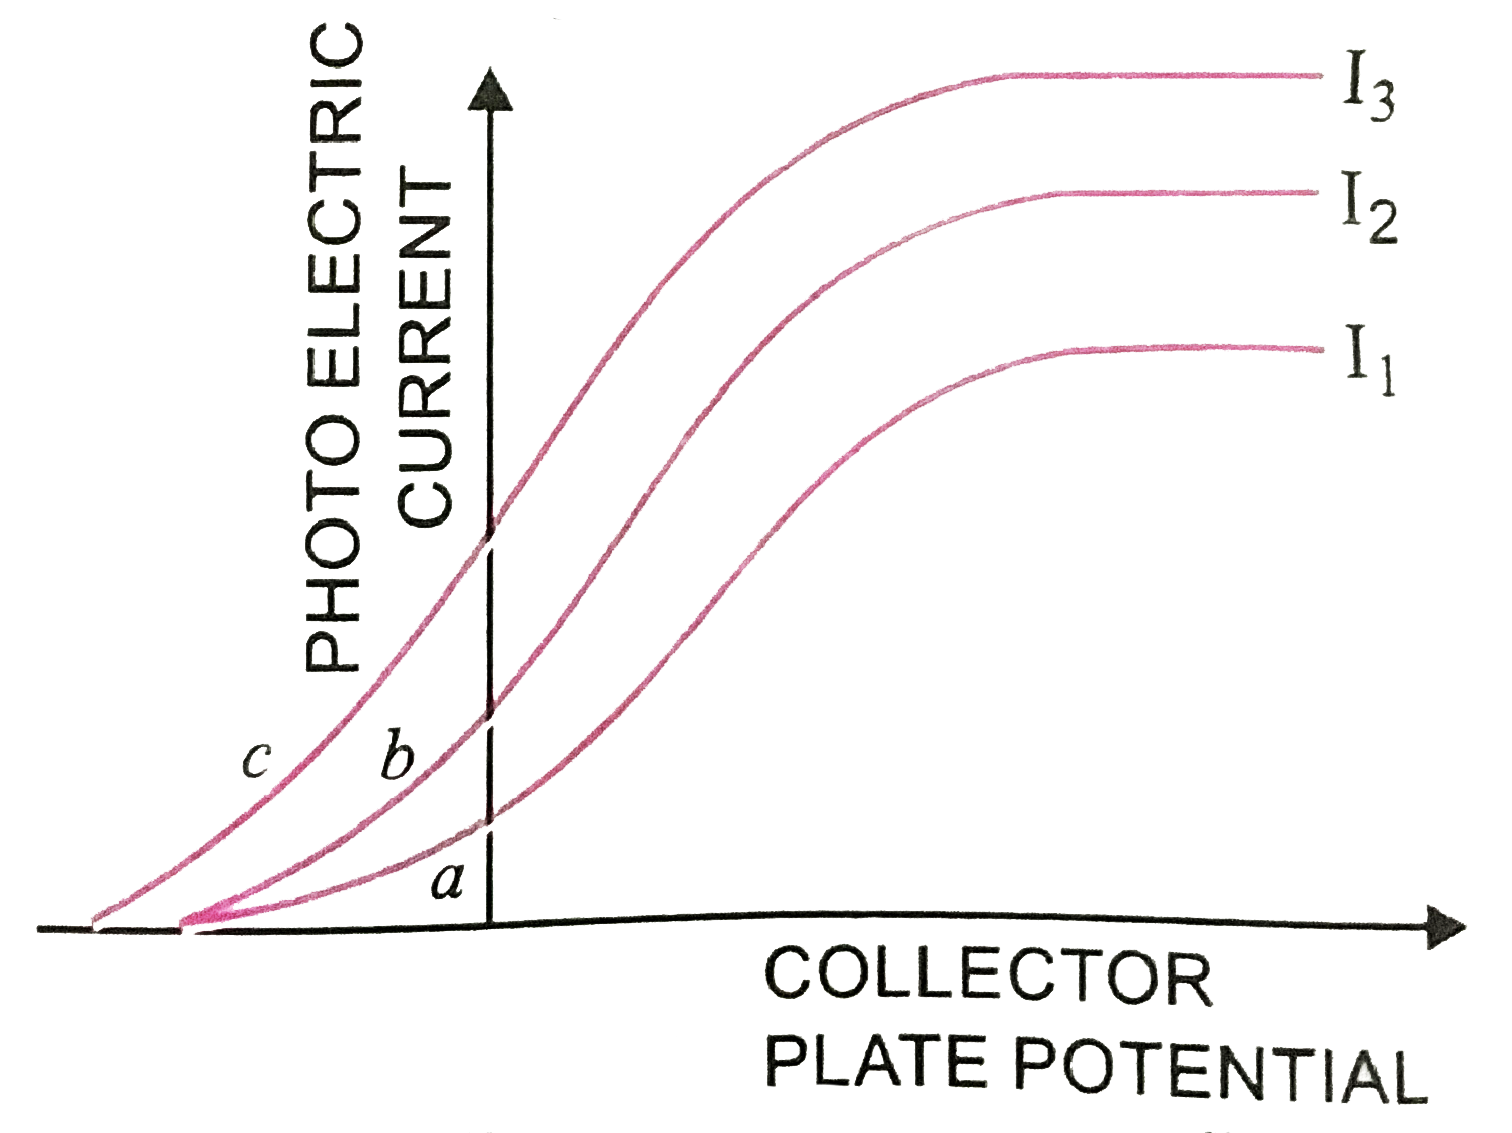 The Fig shows a plot of three curves a, b, c showing the variation of photocurrent versis collector plate potential for the different intensities I1, I2 and I3 having frequencies v1, v2 and v3 respectively, incident on a photosensitive surface. Point out the two curves for which the incident radiation have same frequency but different intensities.